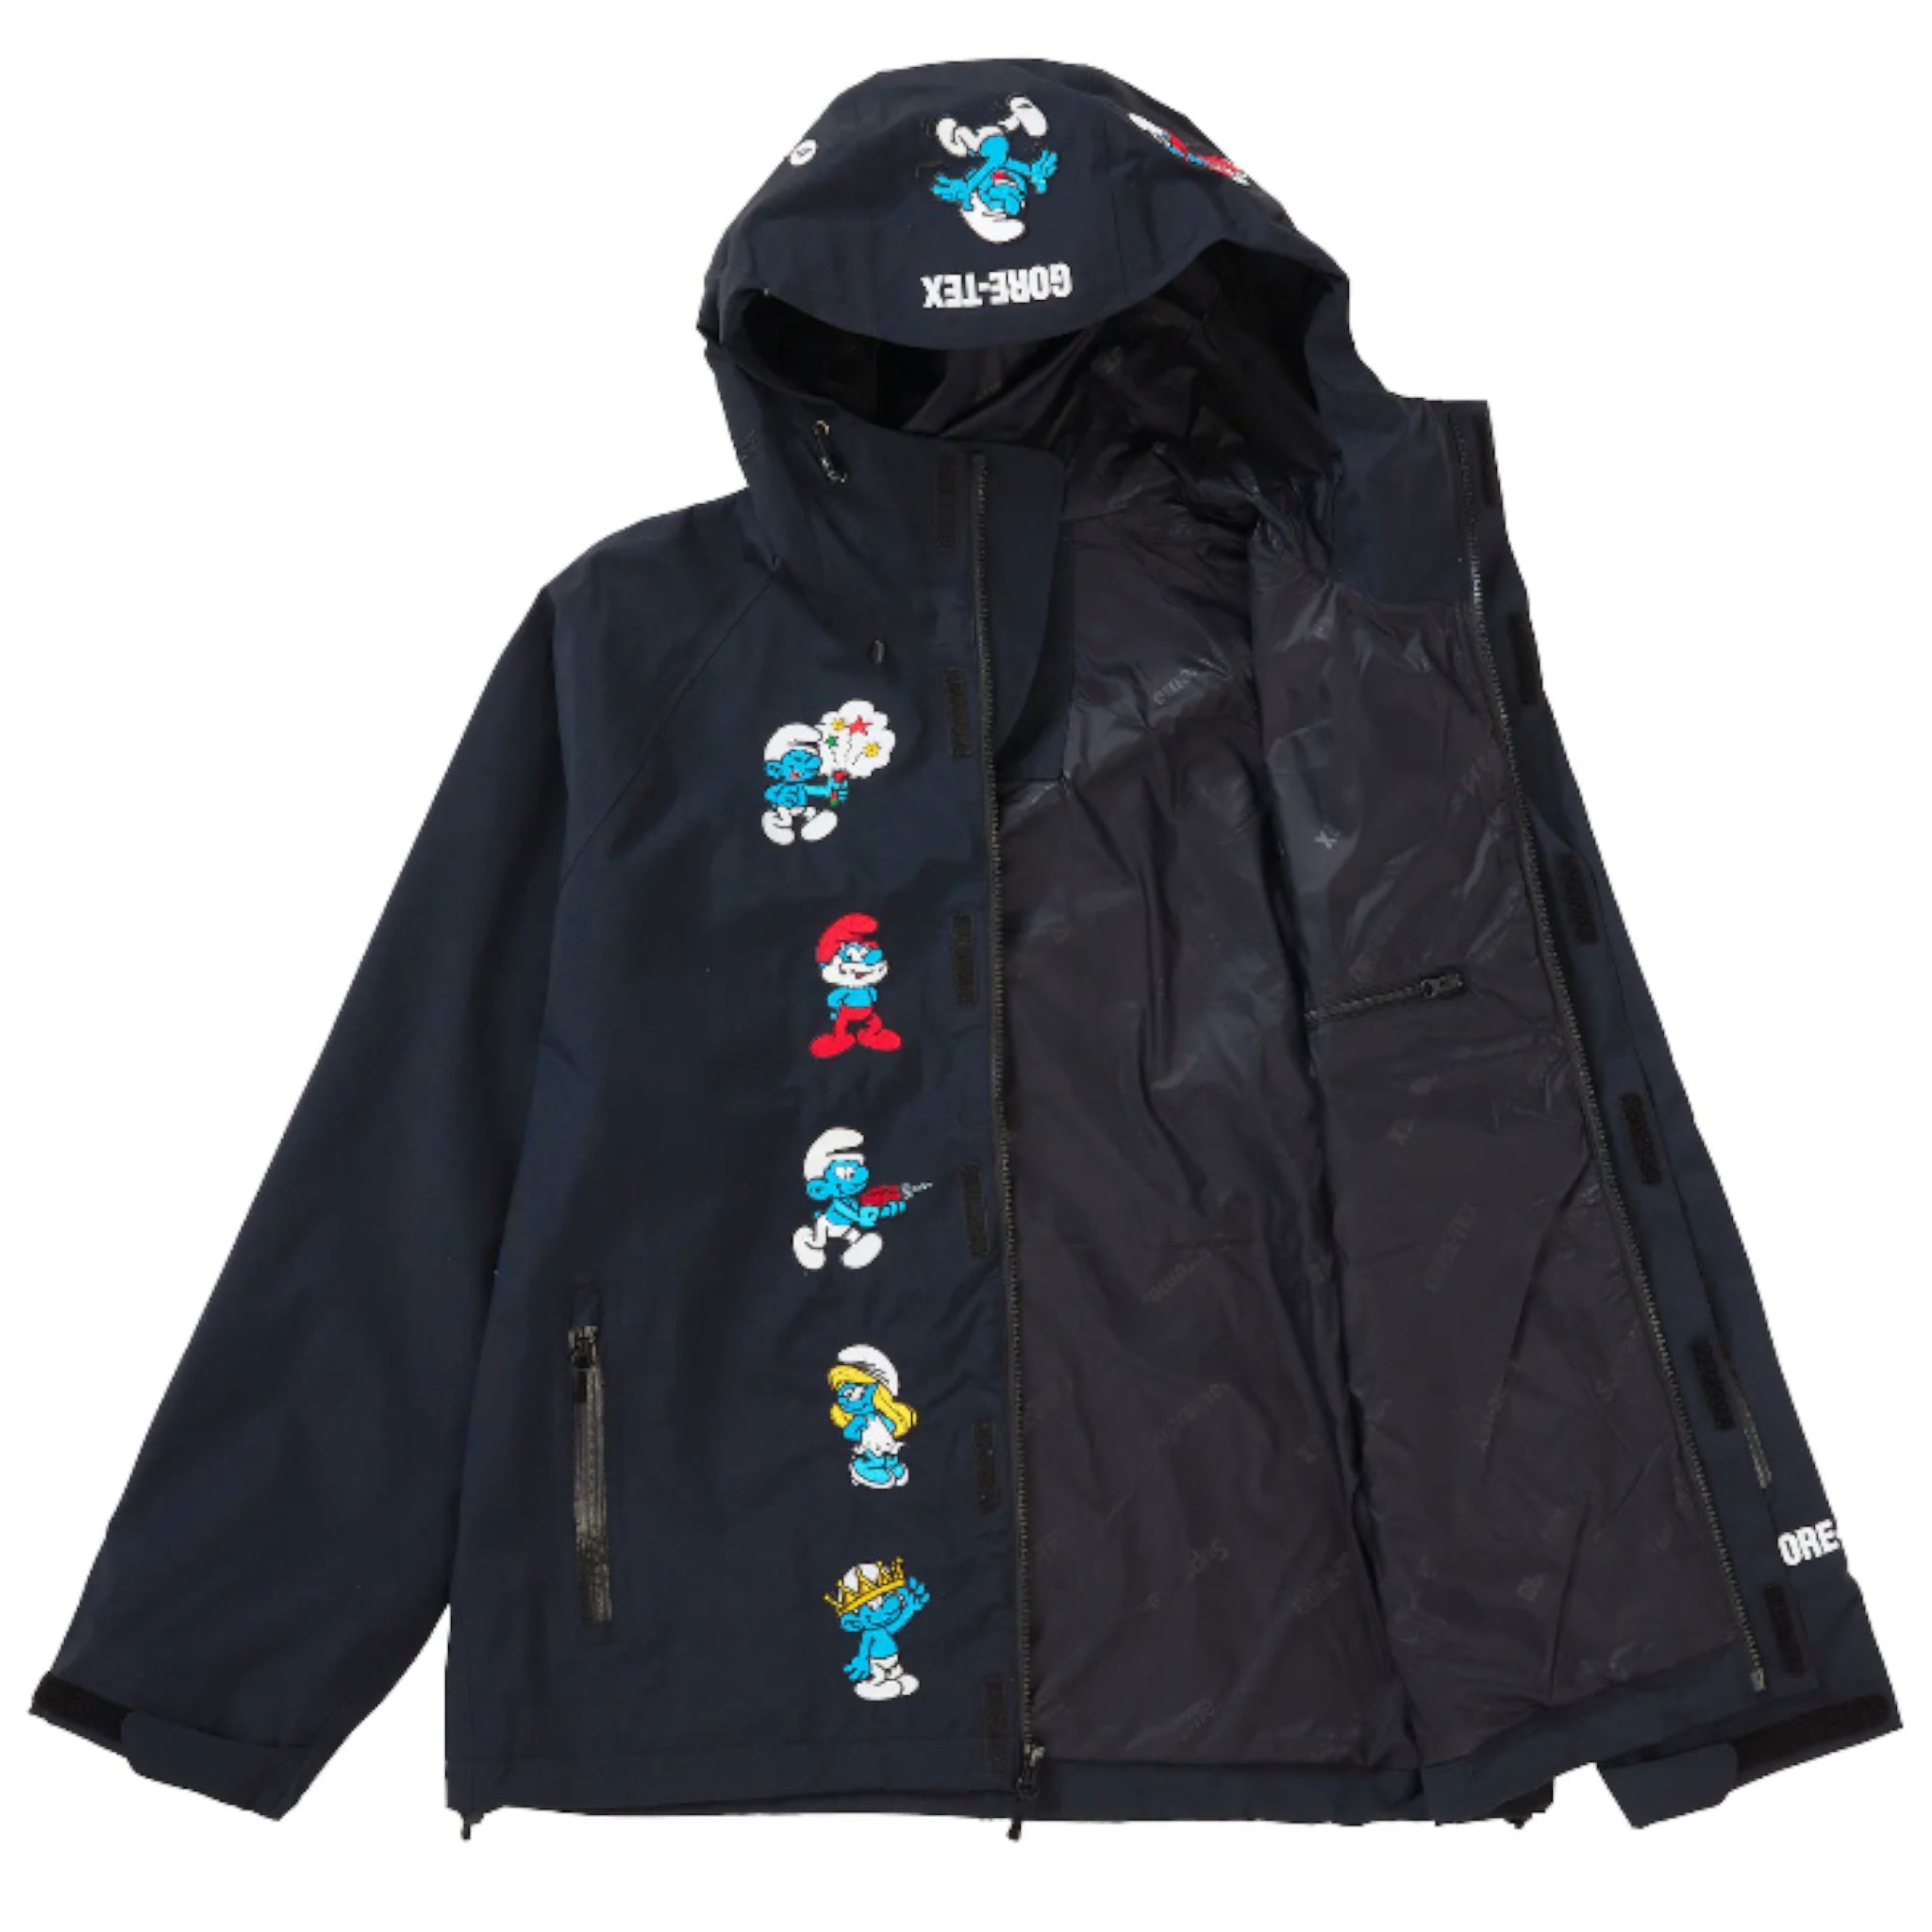 Supreme x The North Face Smurfs GORE-TEX Shell Jacket